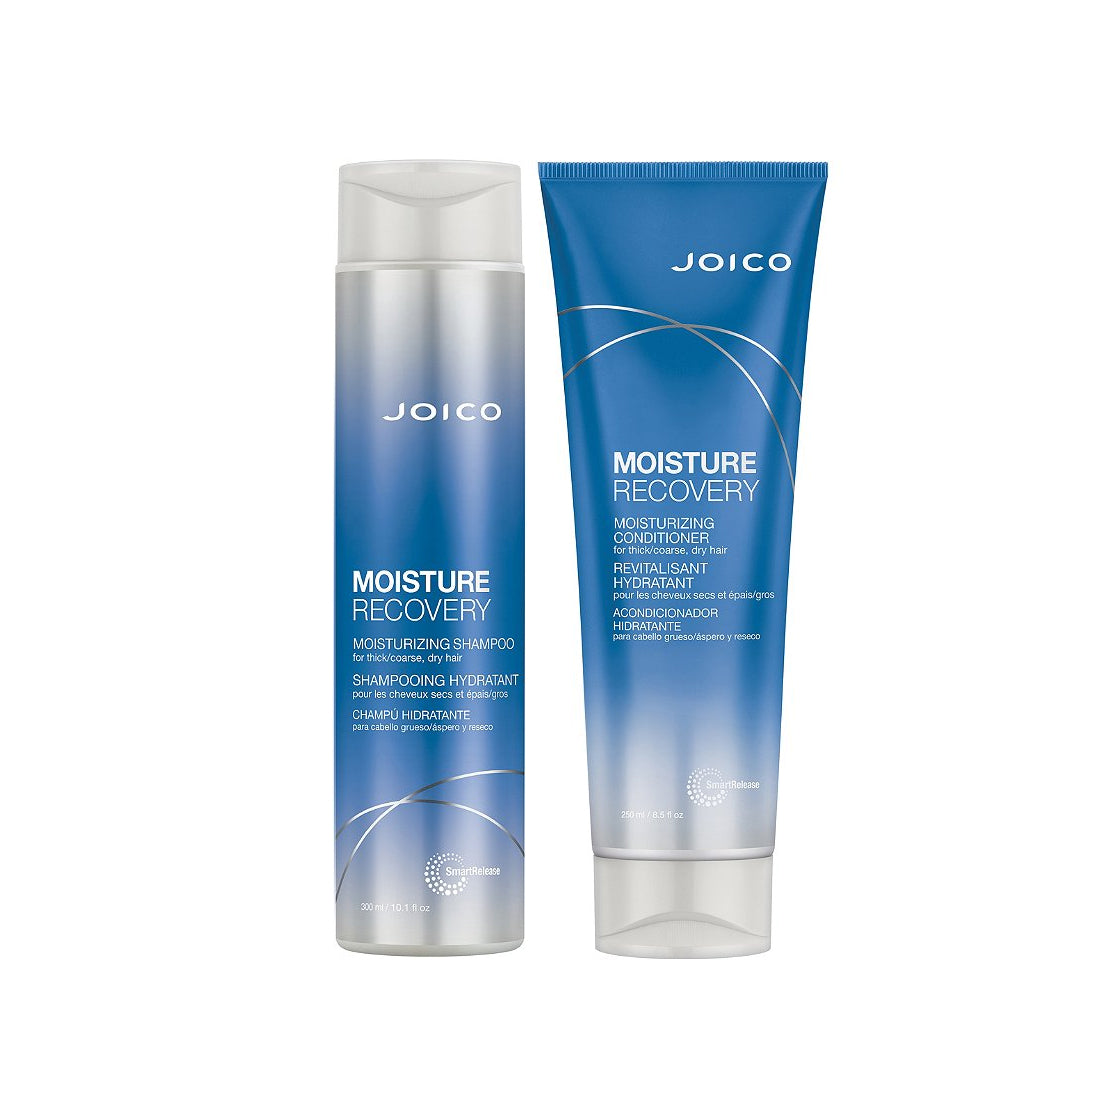 Joico Moisture Recovery Shampoo and Conditioner